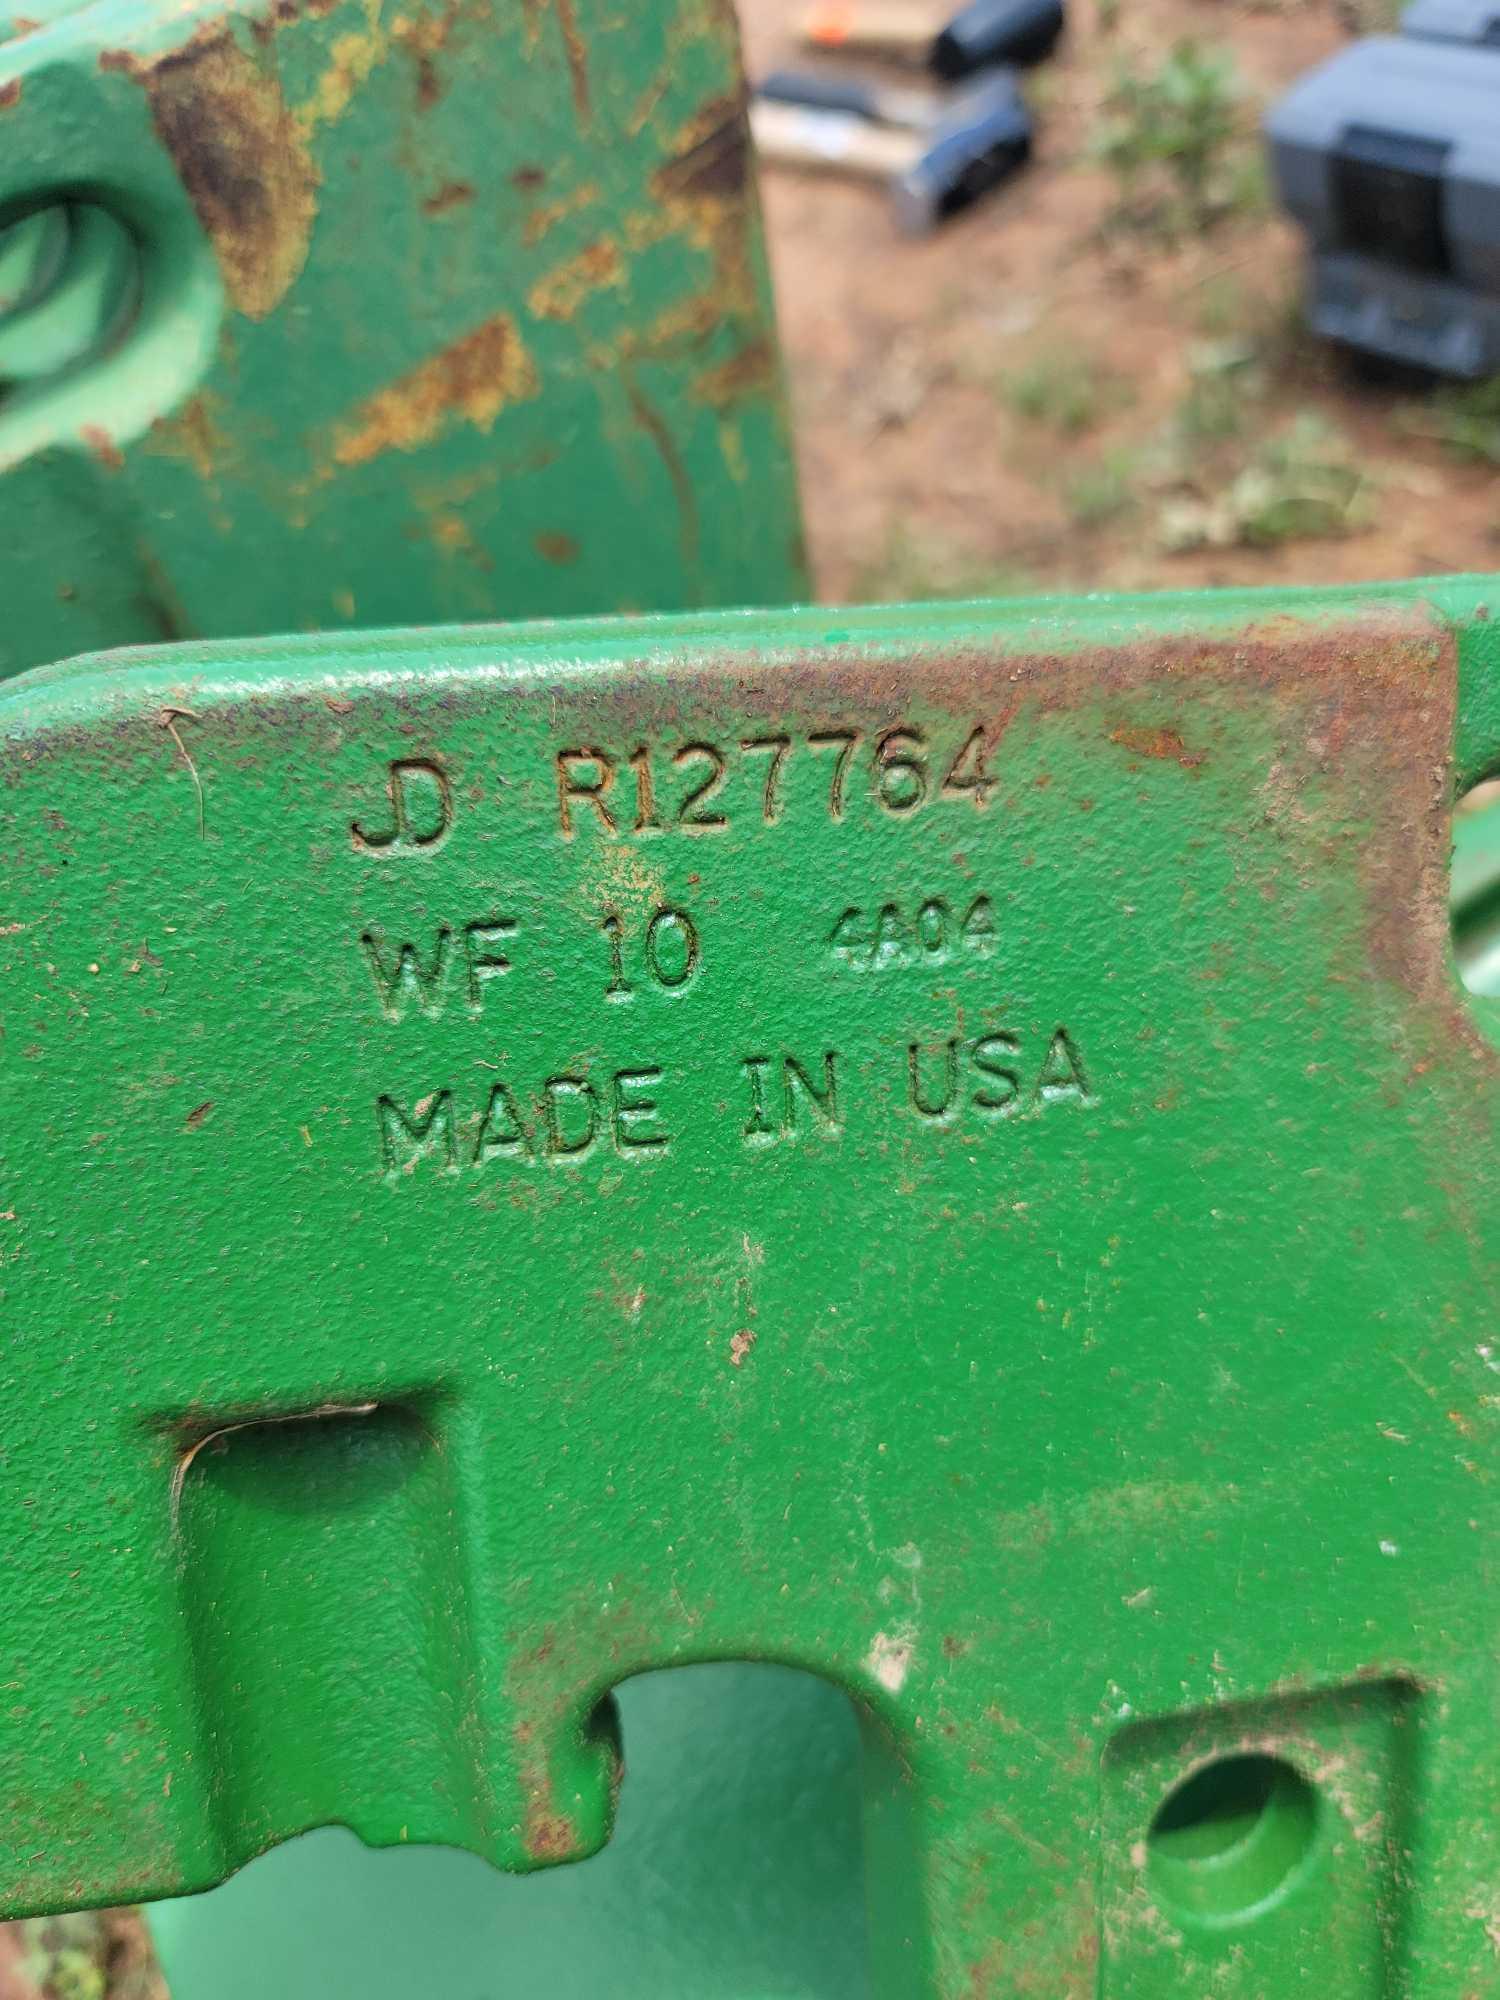 tractor weights